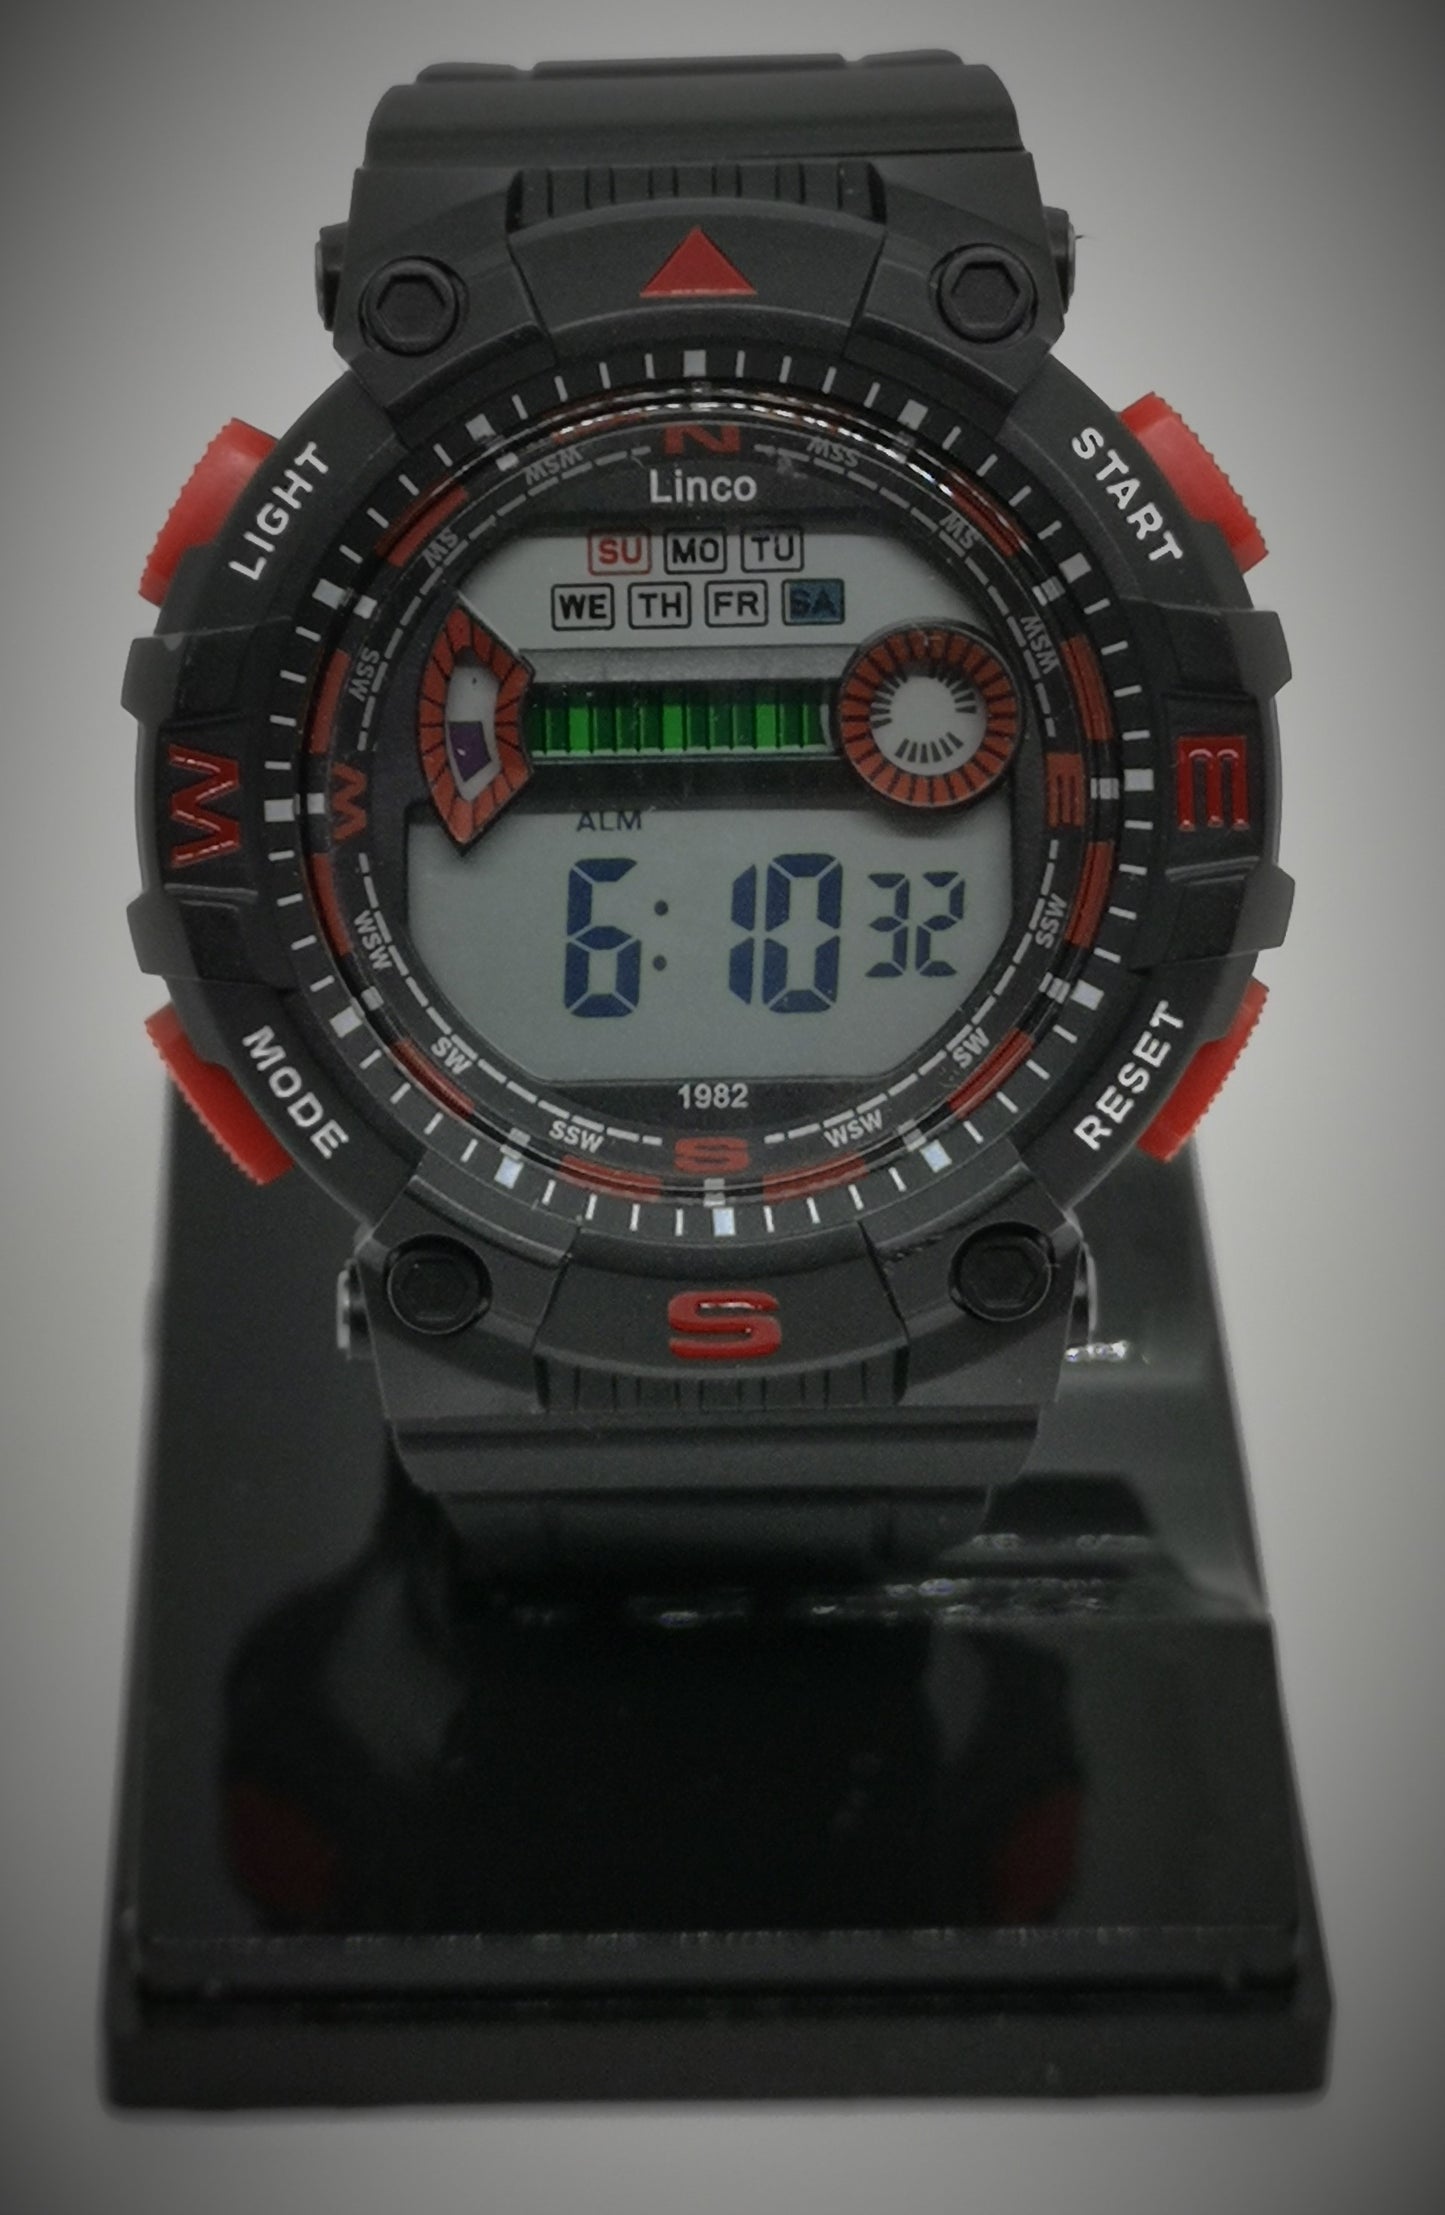 Digital red and black watch with large 4.5cm face